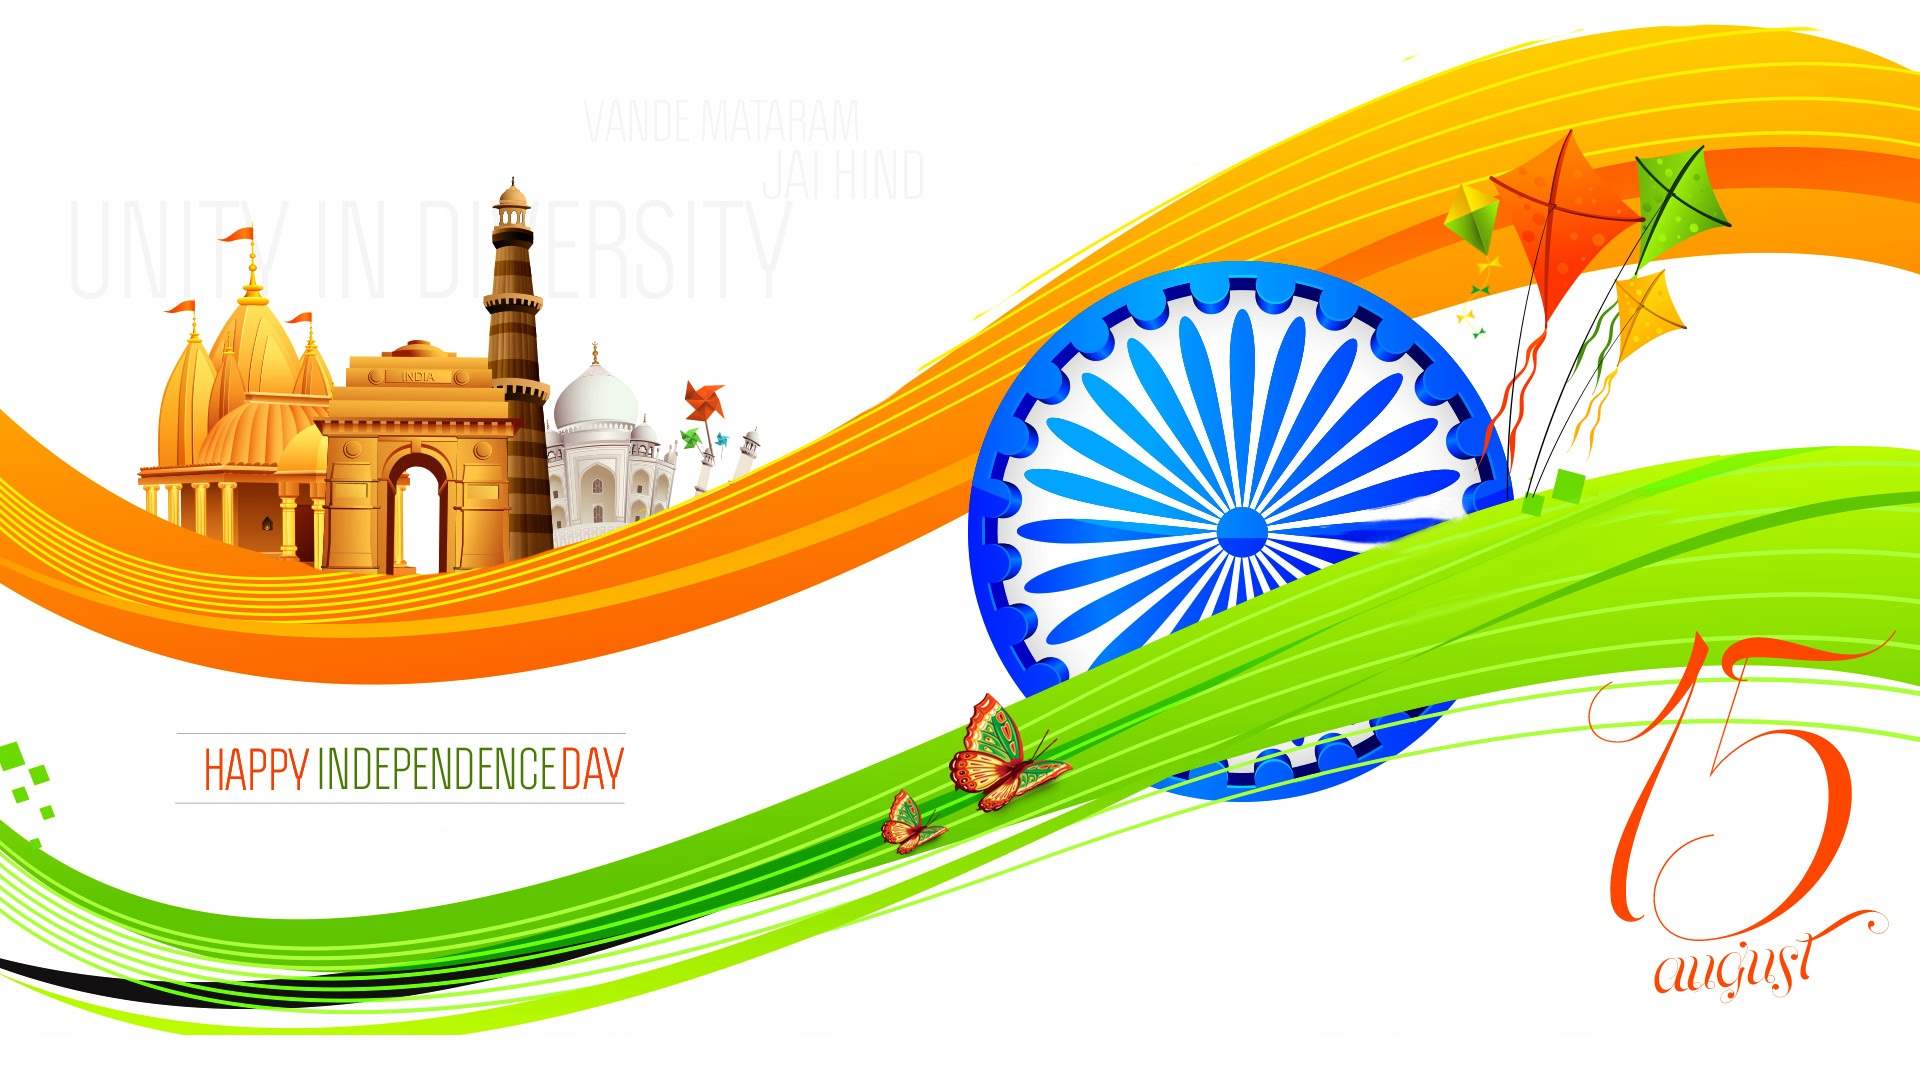 Happy Independence Day Wishes HD India Wallpaper Mobile